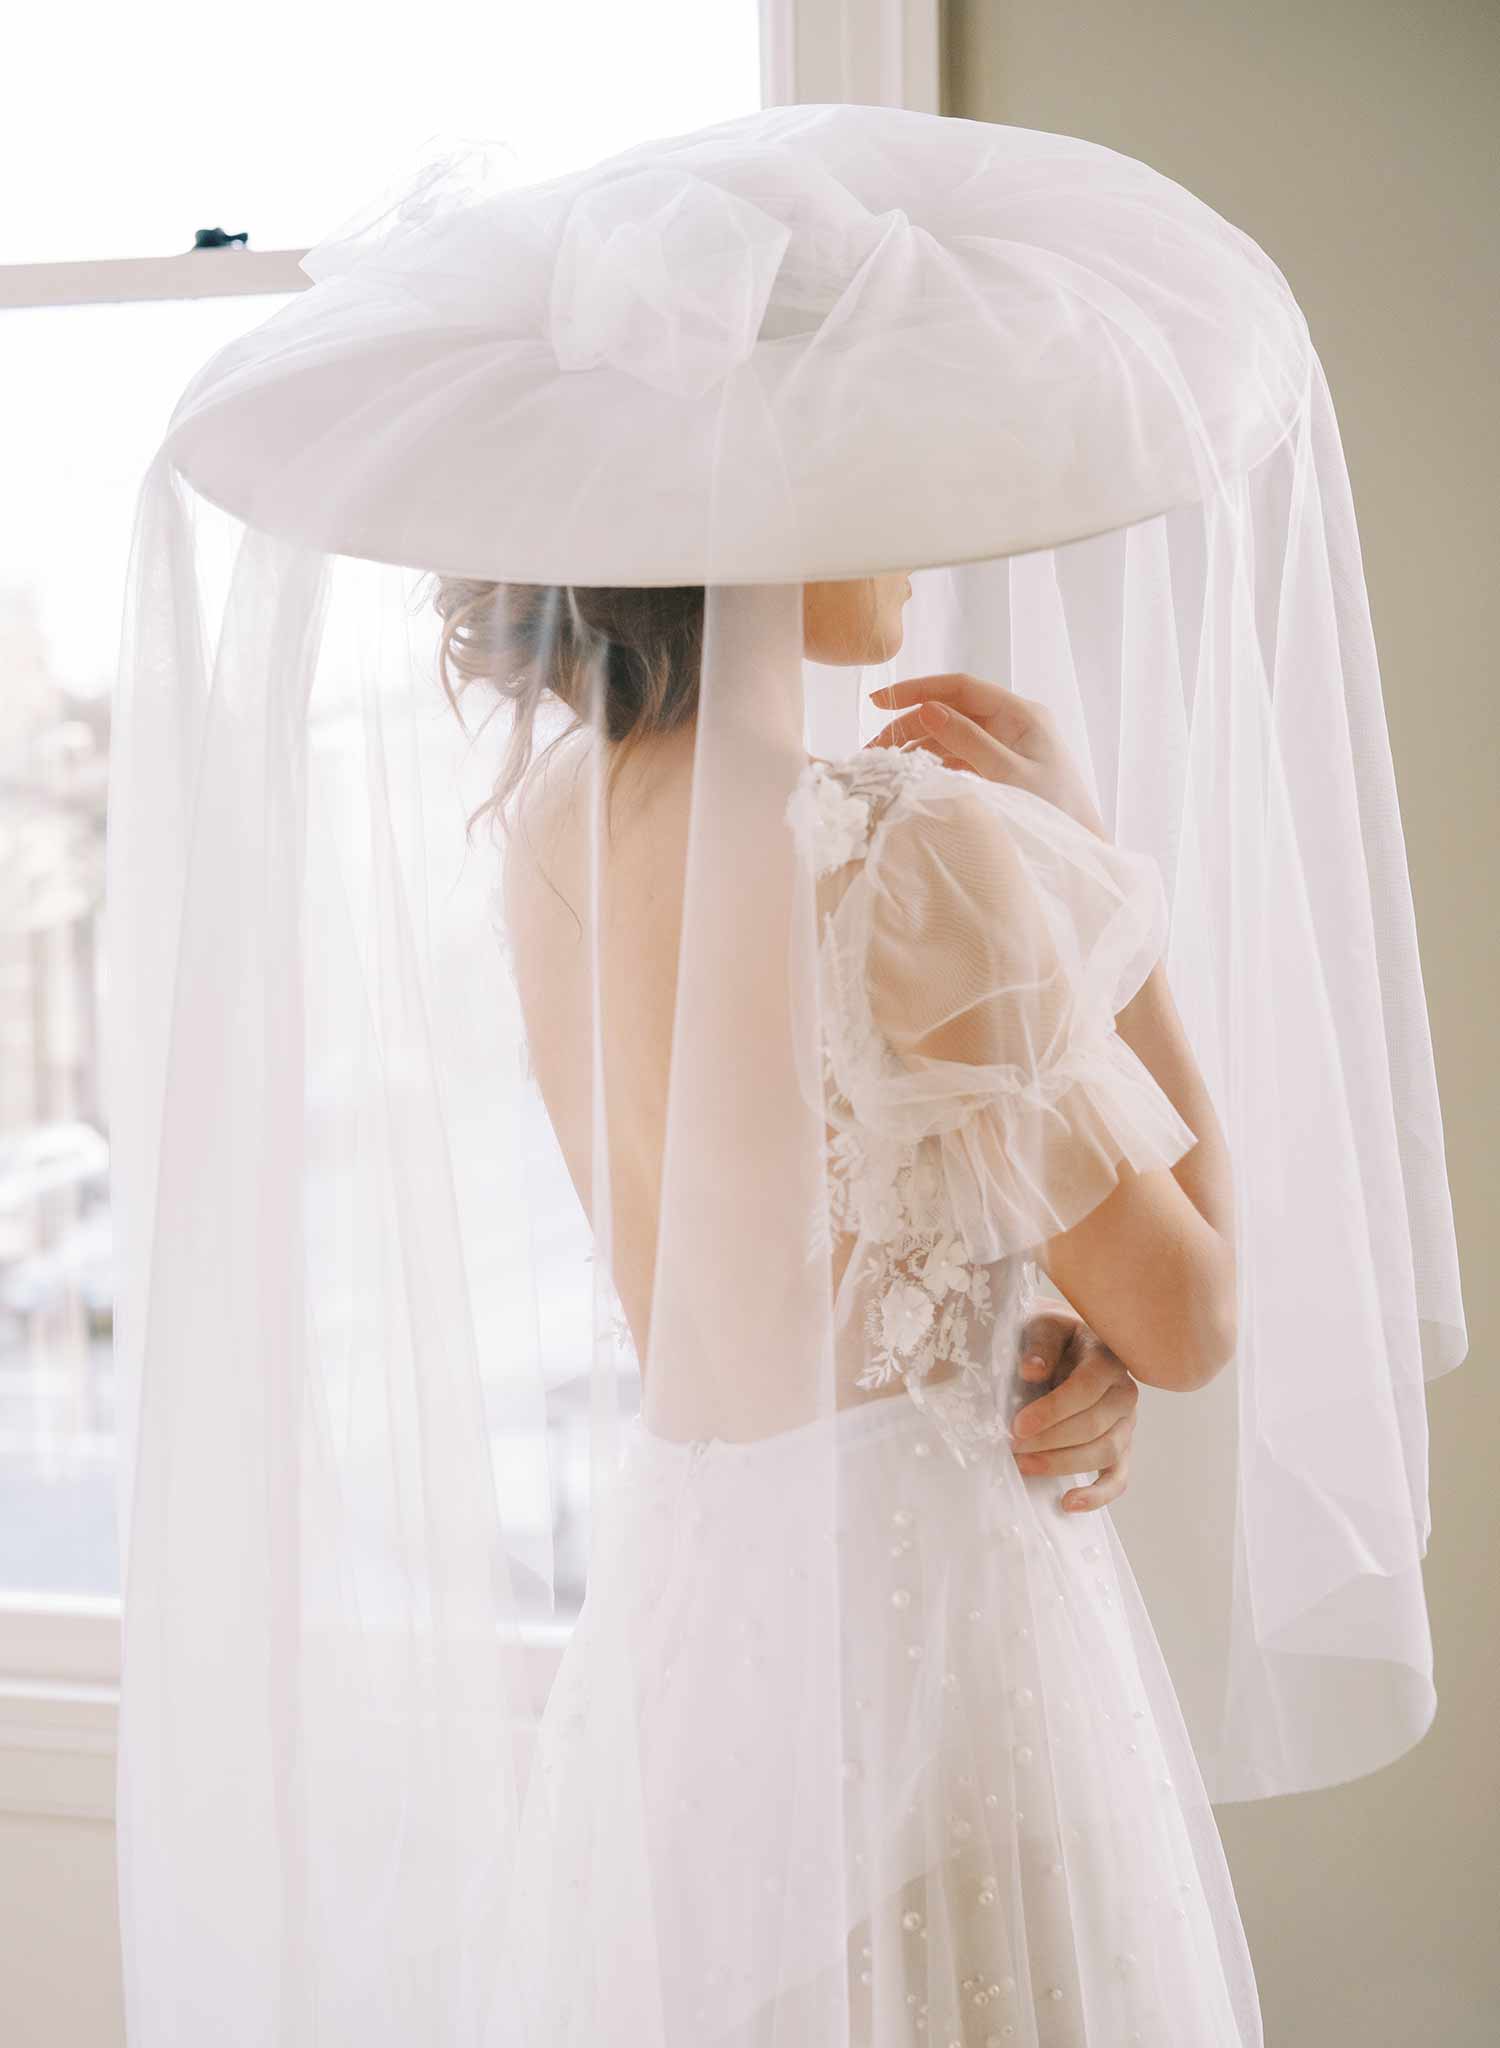 Dream cloud bridal hat with veil - Style #2456